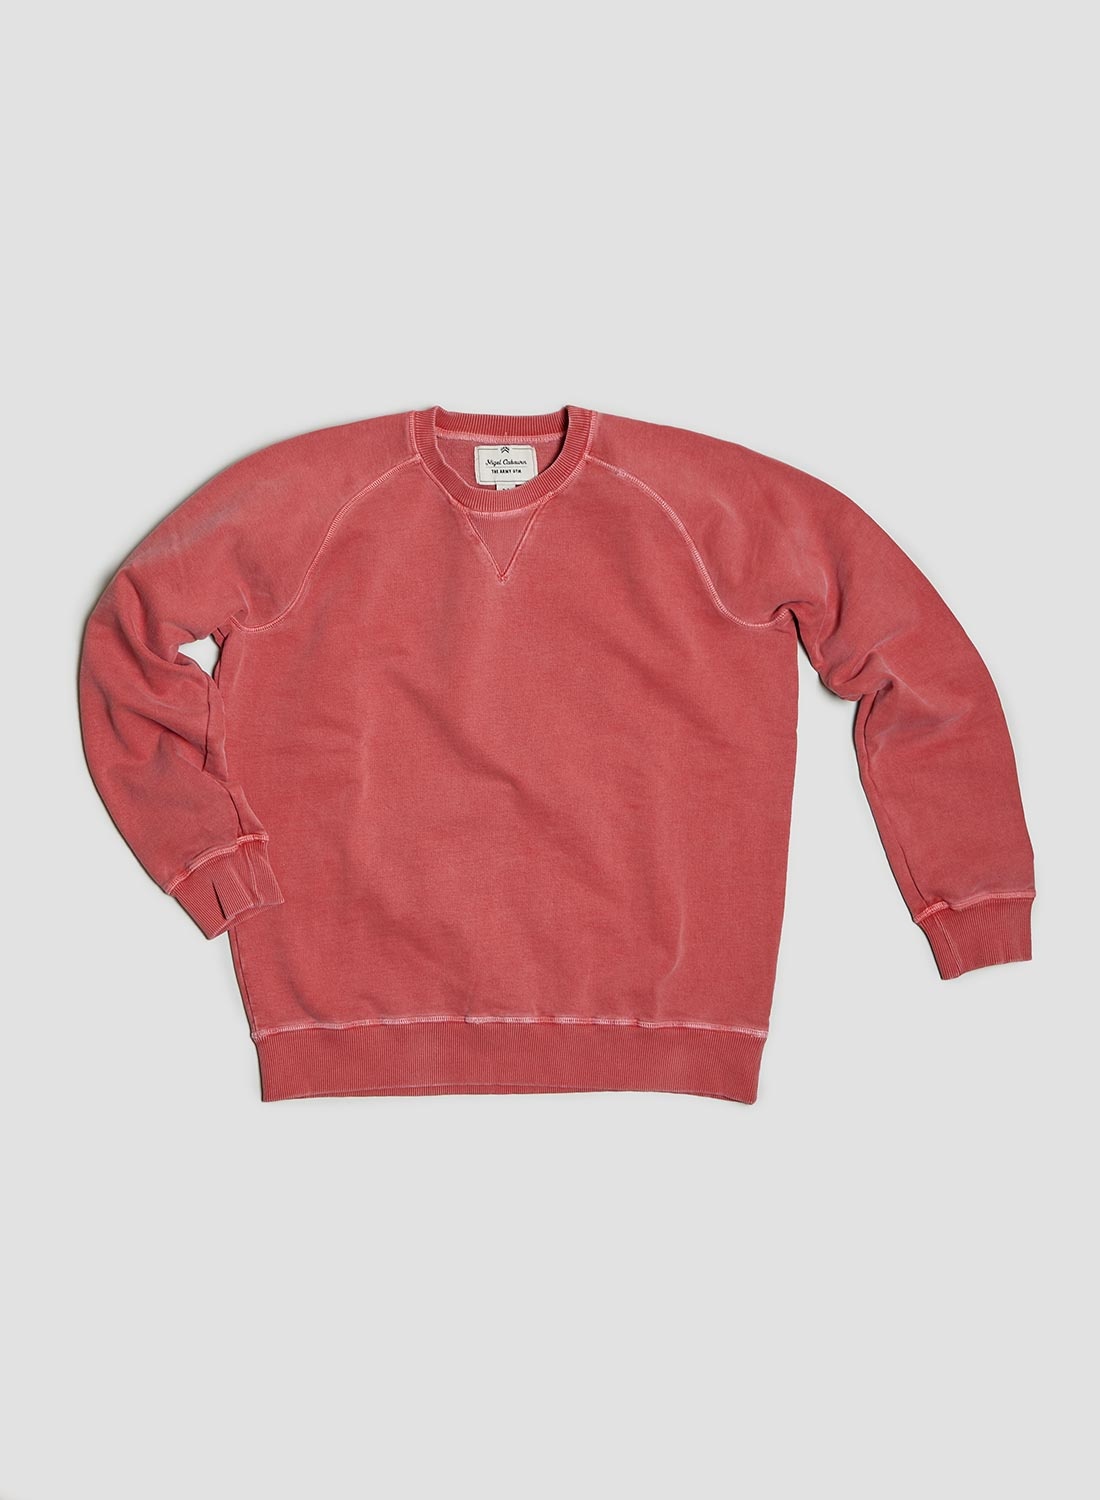 Embroidered Arrow Crew in Vintage Red - 1